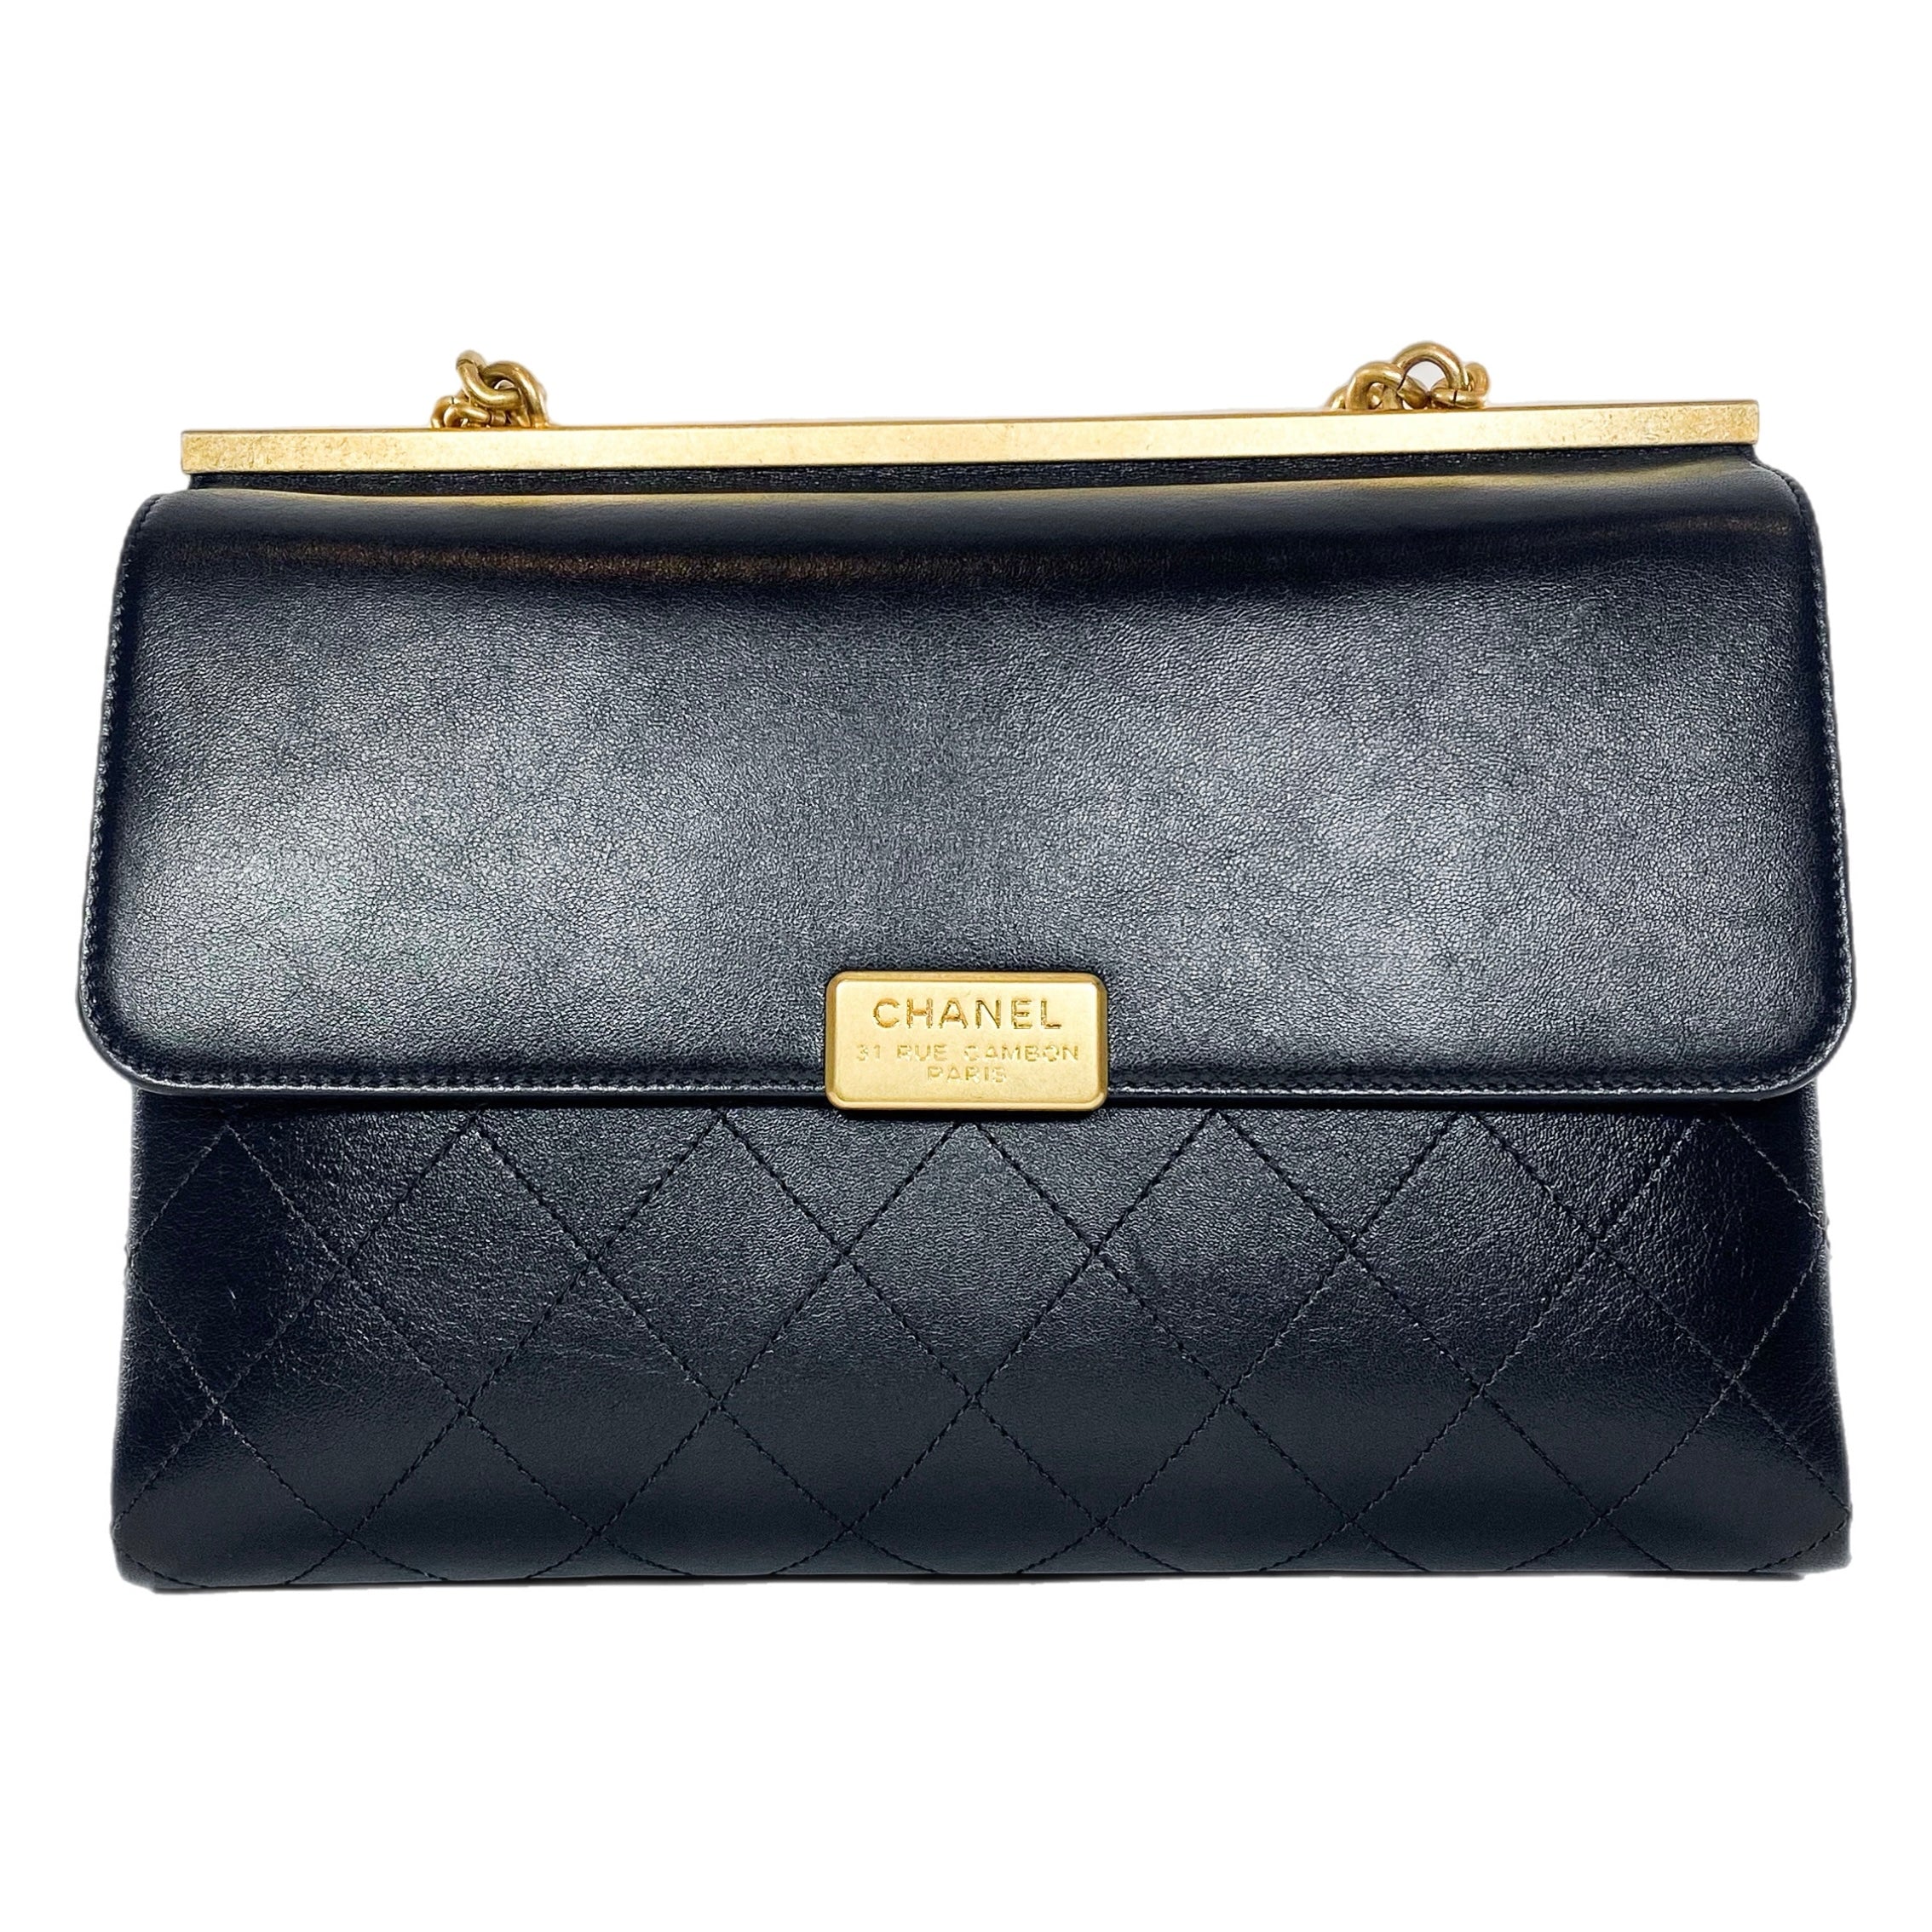 Chanel Black Coco Luxe Two Pocket Flap Bag